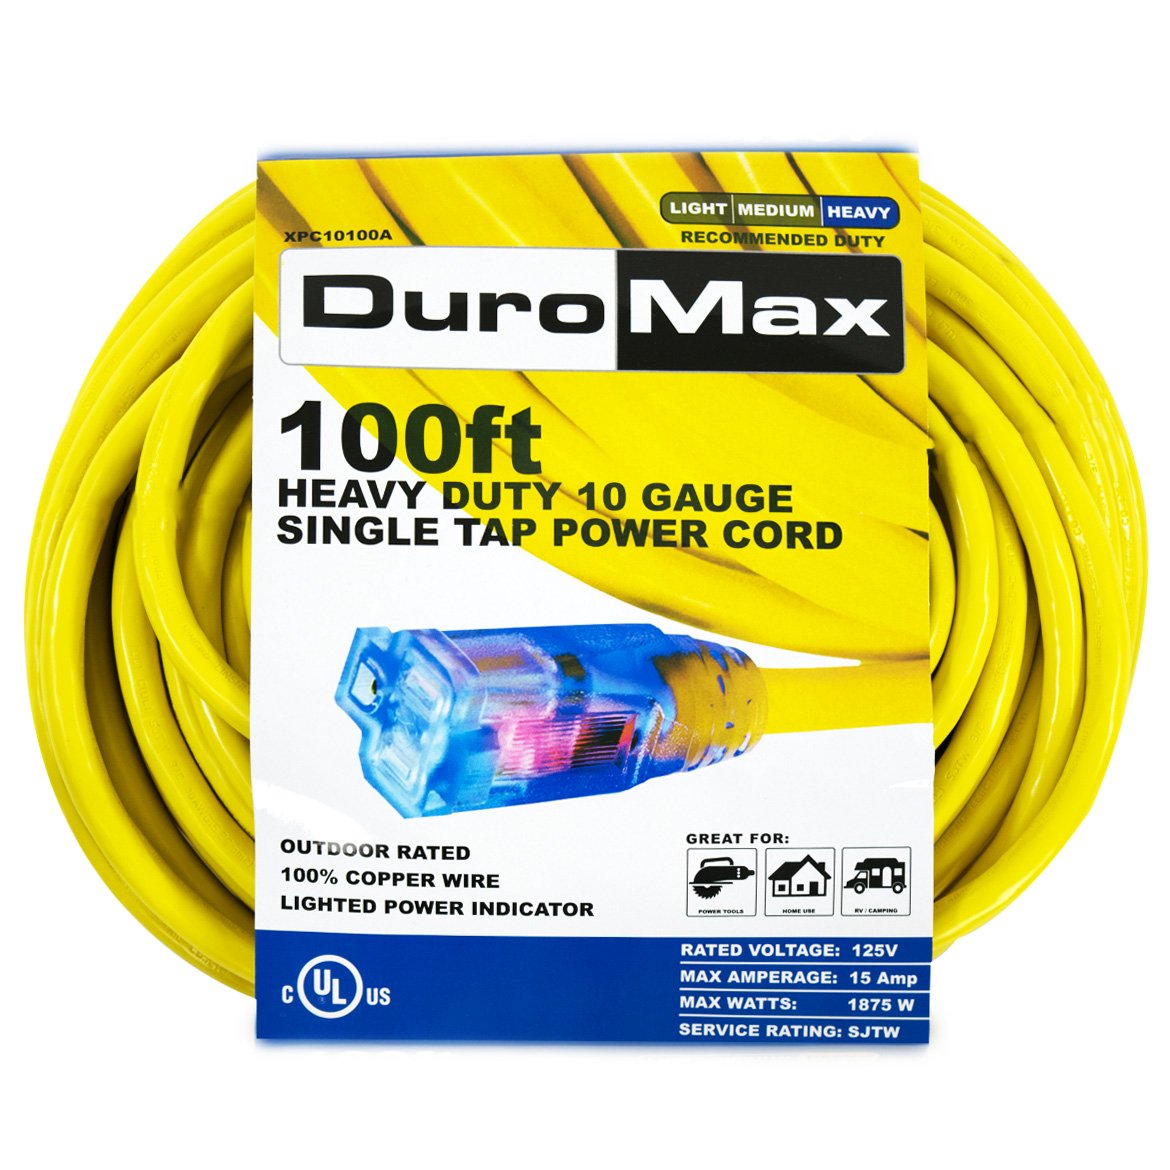 DuroMax XPC10100A 100-Foot 10 Gauge Single Tap Extension Power Cord